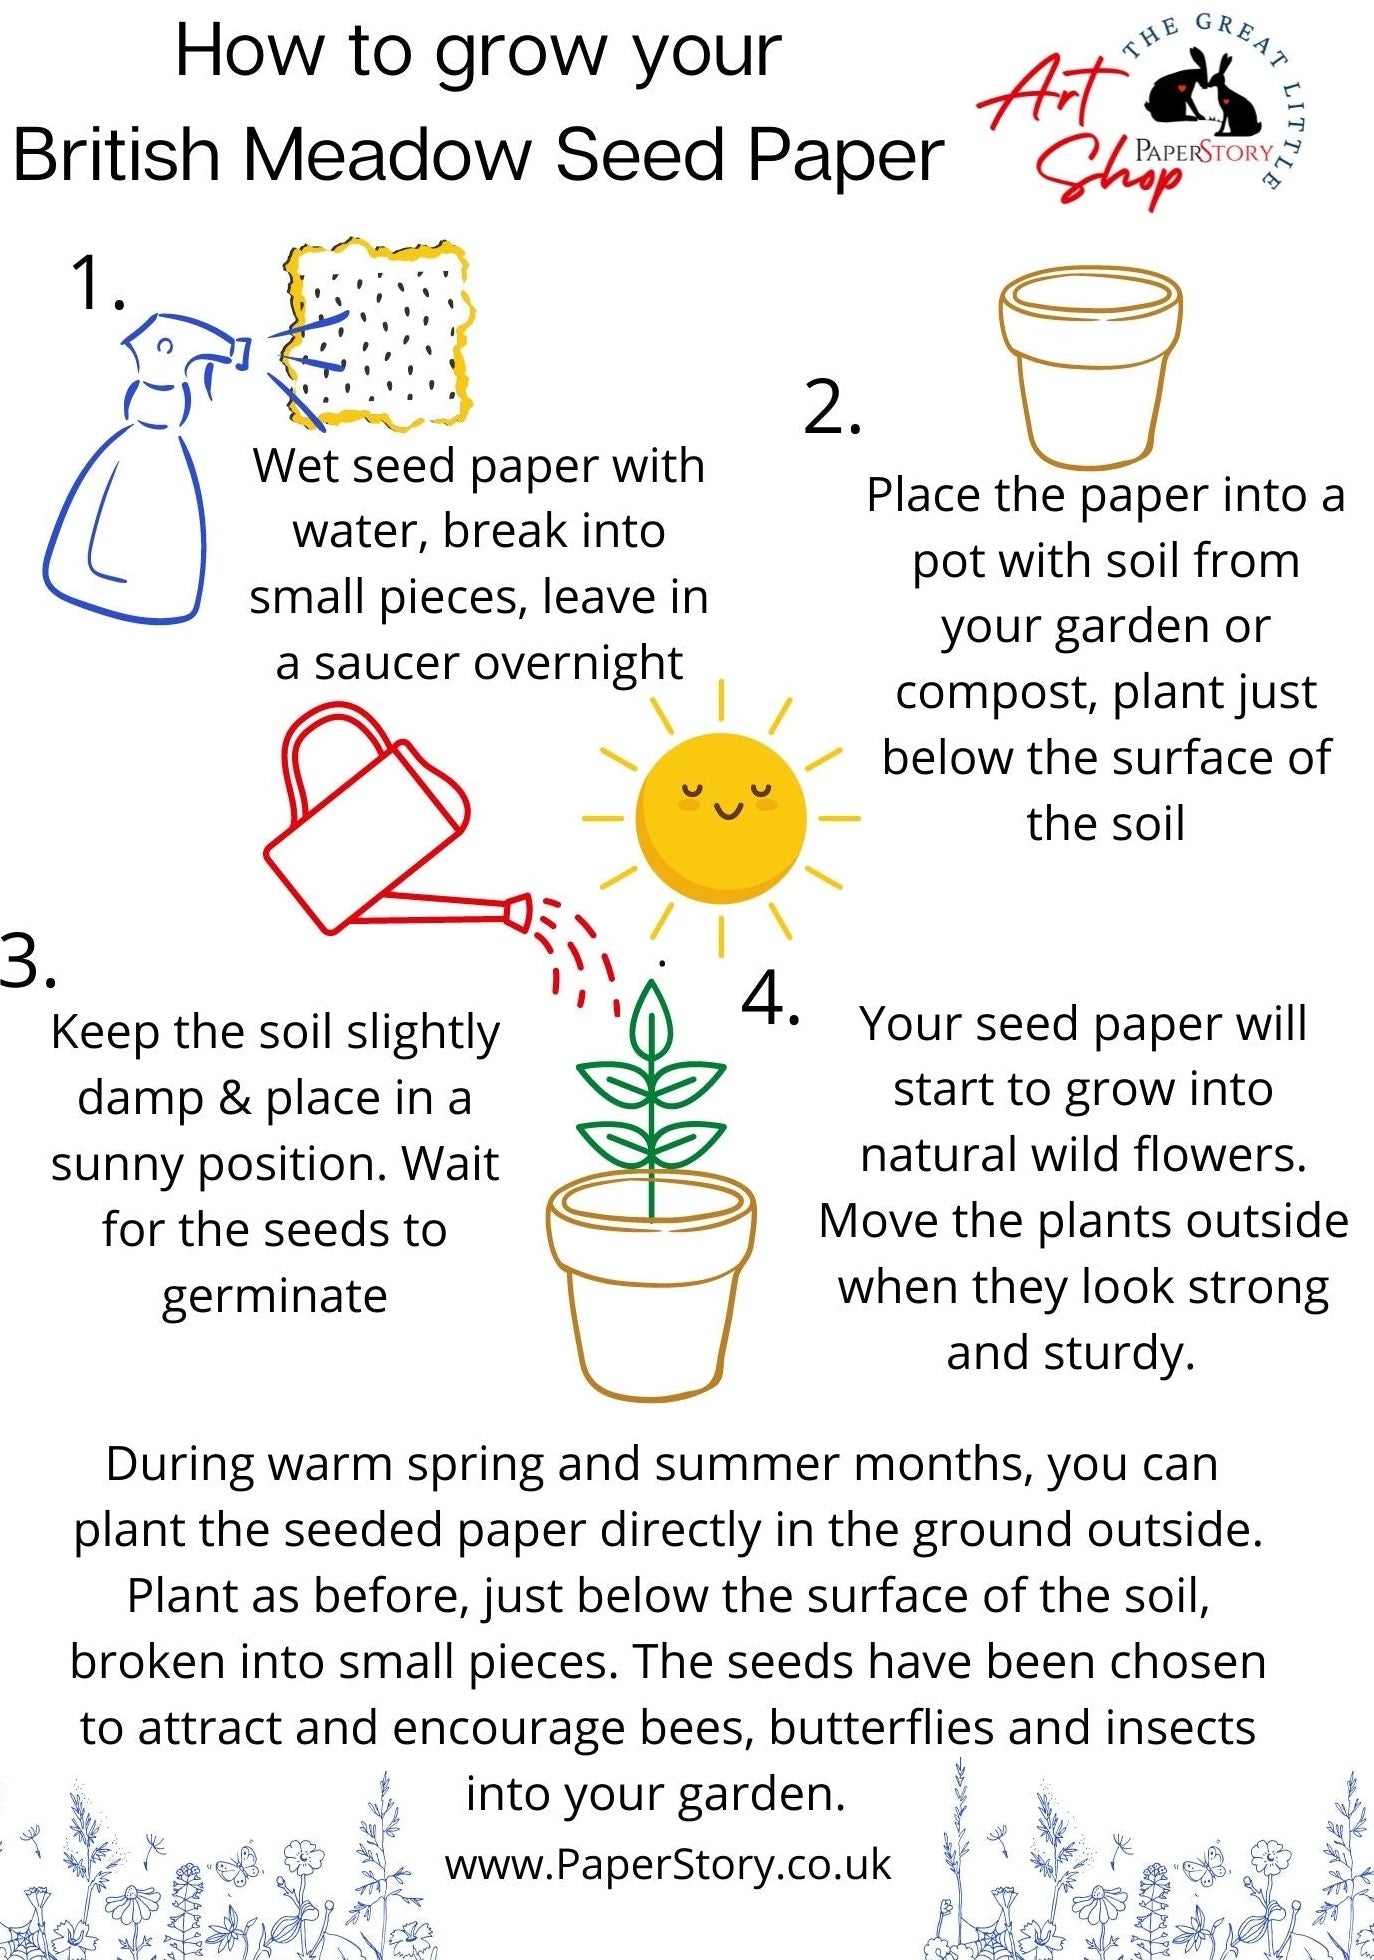 How to plant seed paper